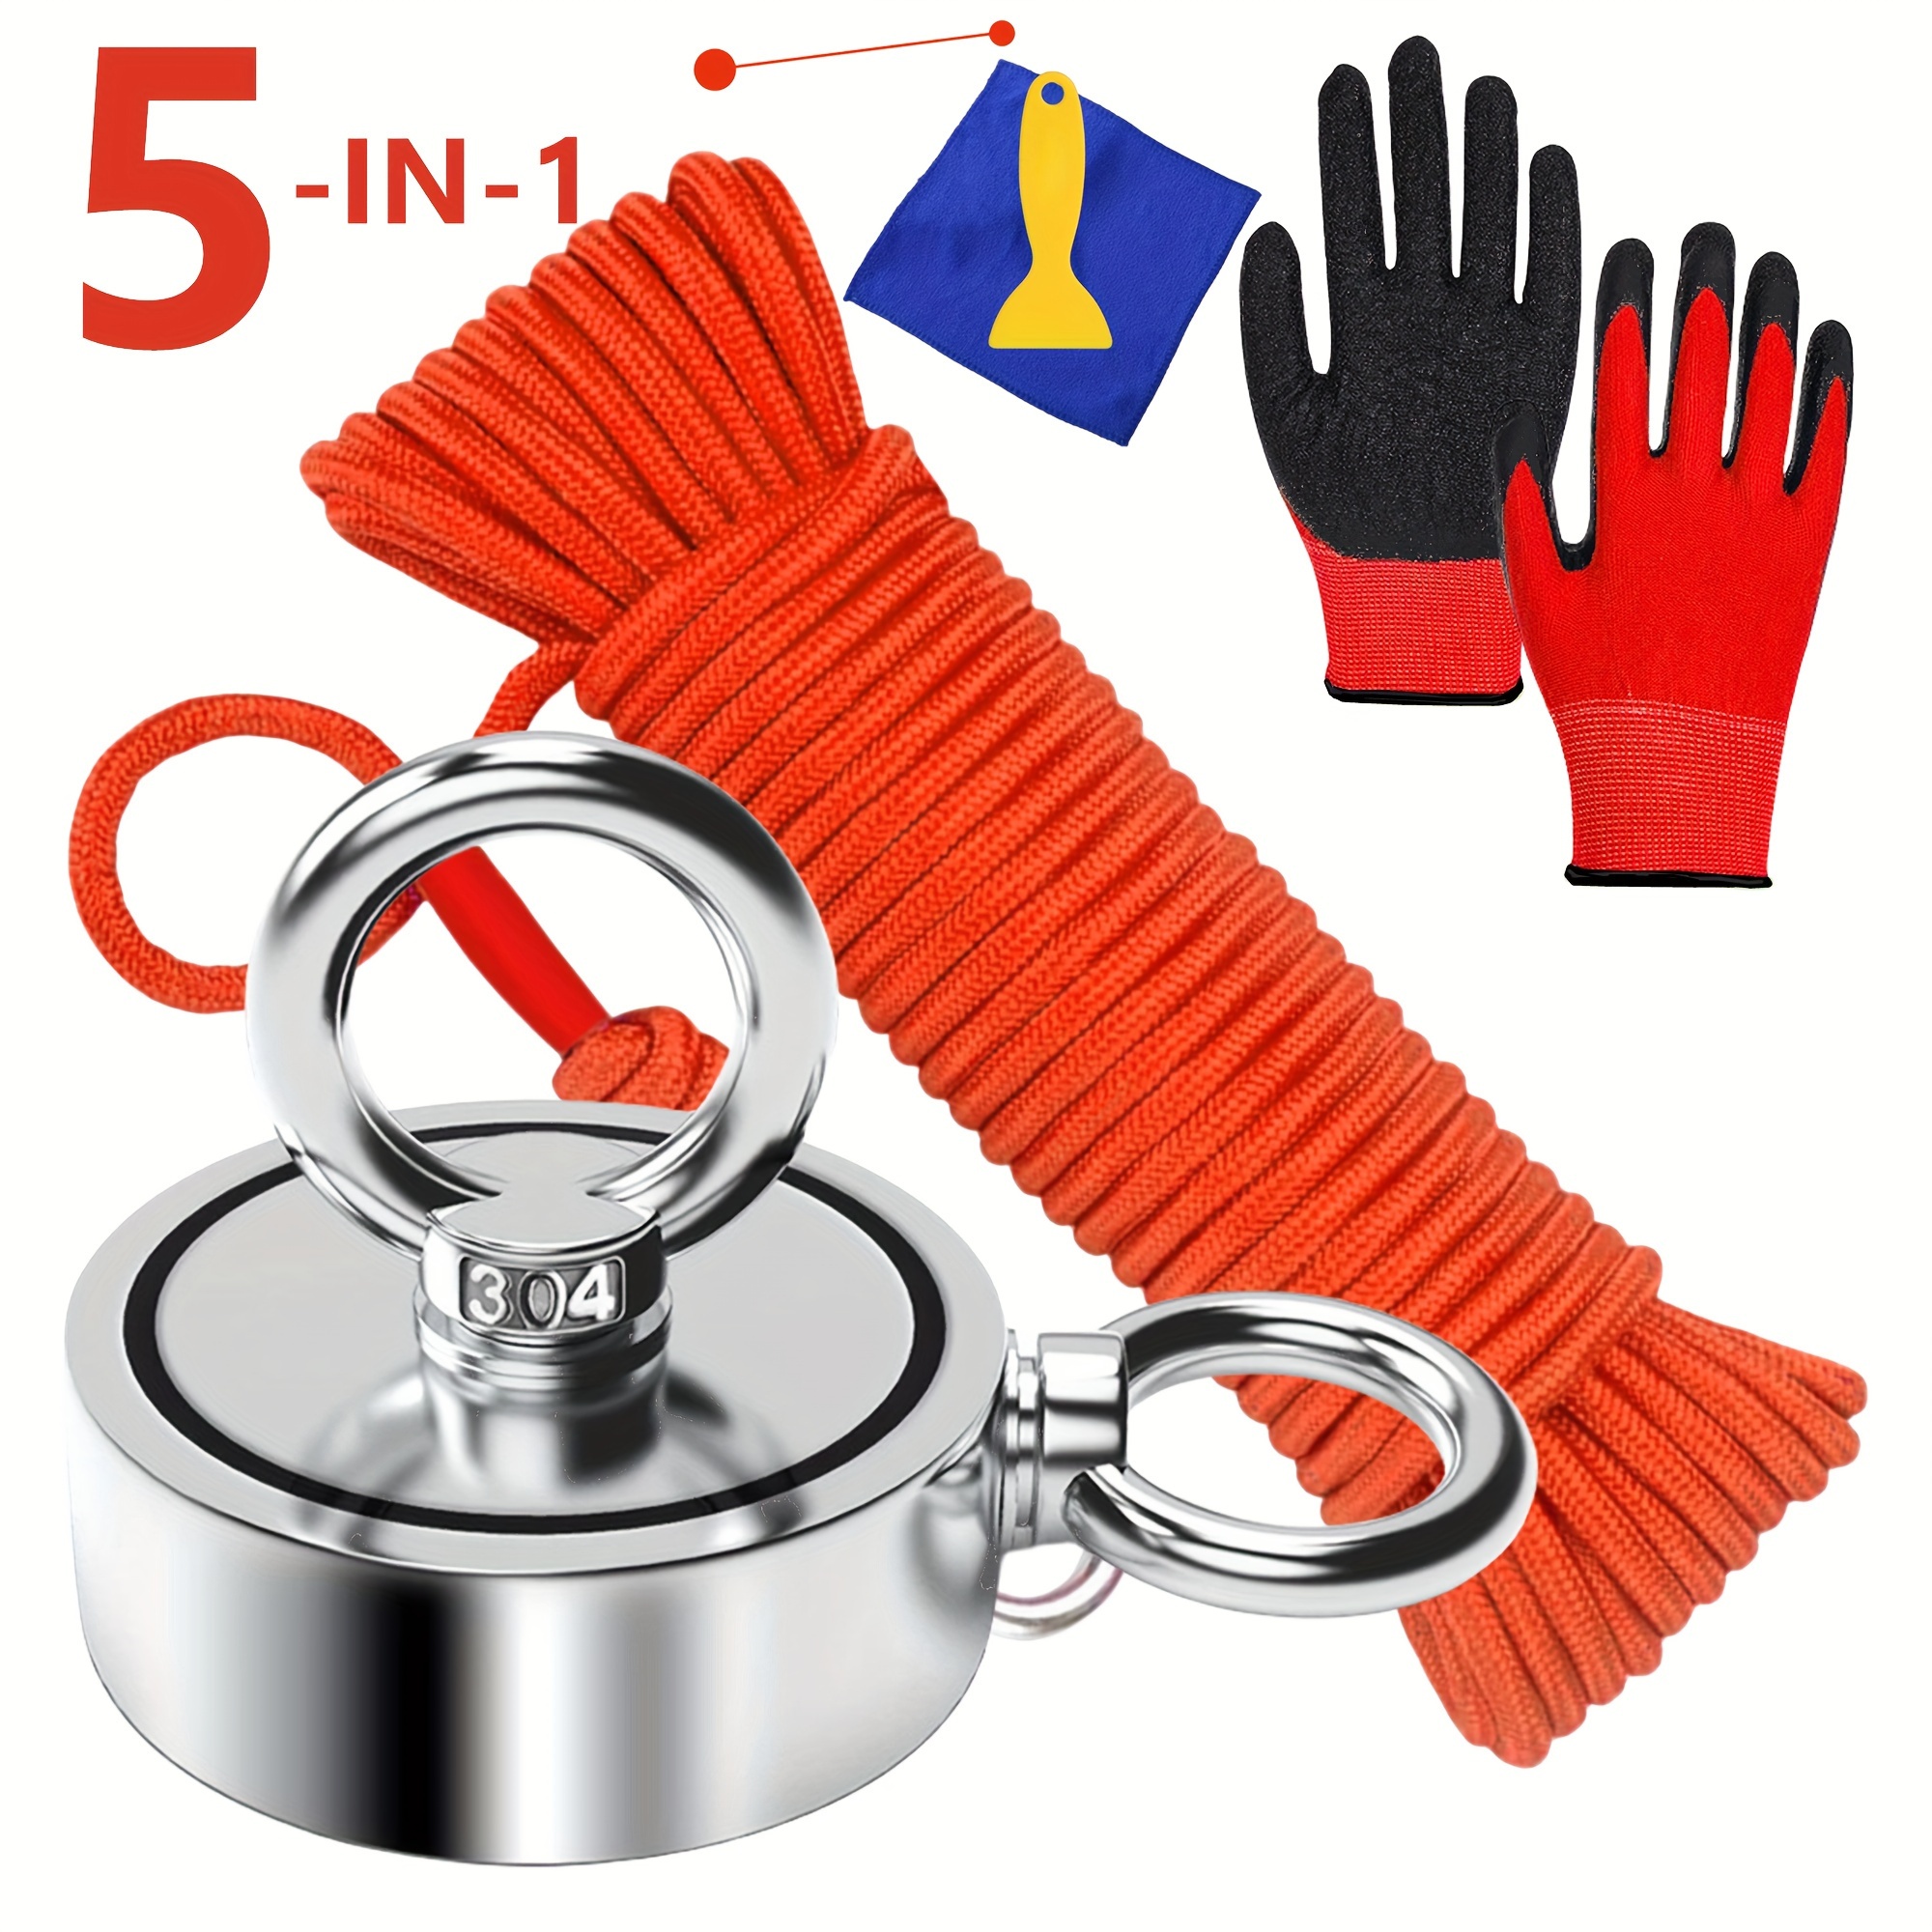 4-IN-1 Red Double Sided Fishing Salvage Magnet Neodymium Metal Magnet  Detector Fishing Salvage Kit With 787.40in Rope